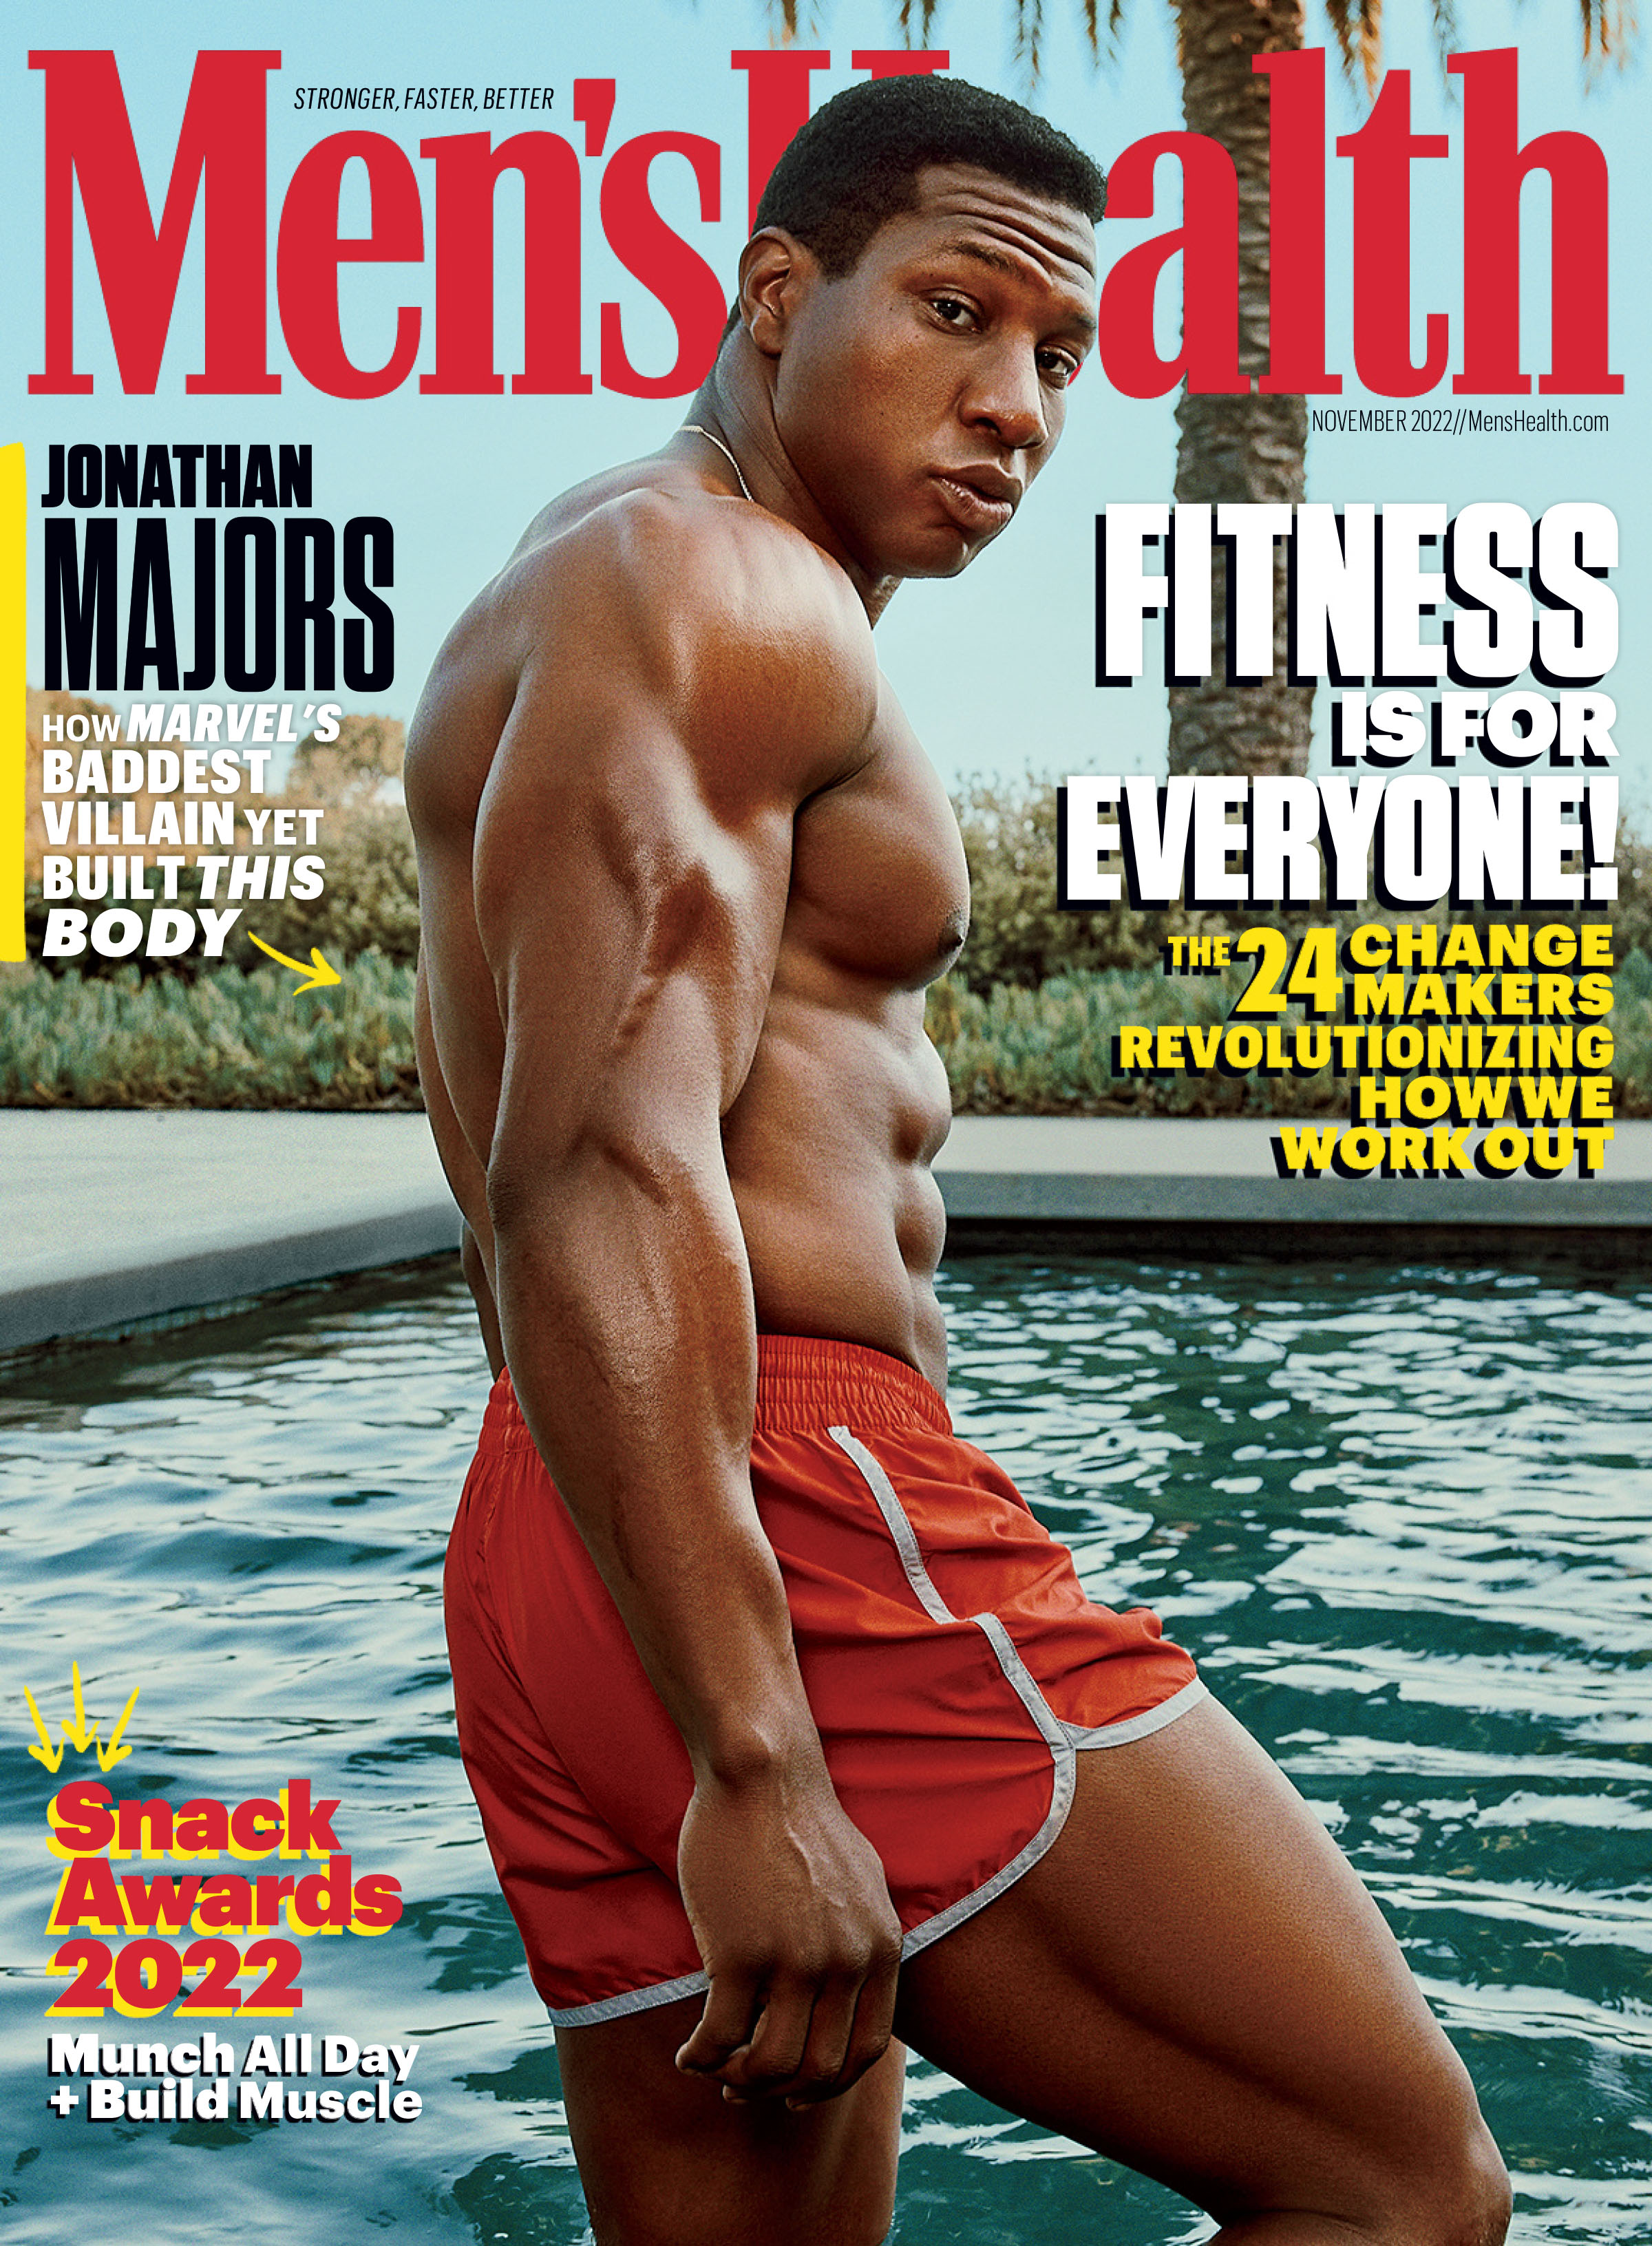 Men's Health - General Excellence, Service and Lifestyle